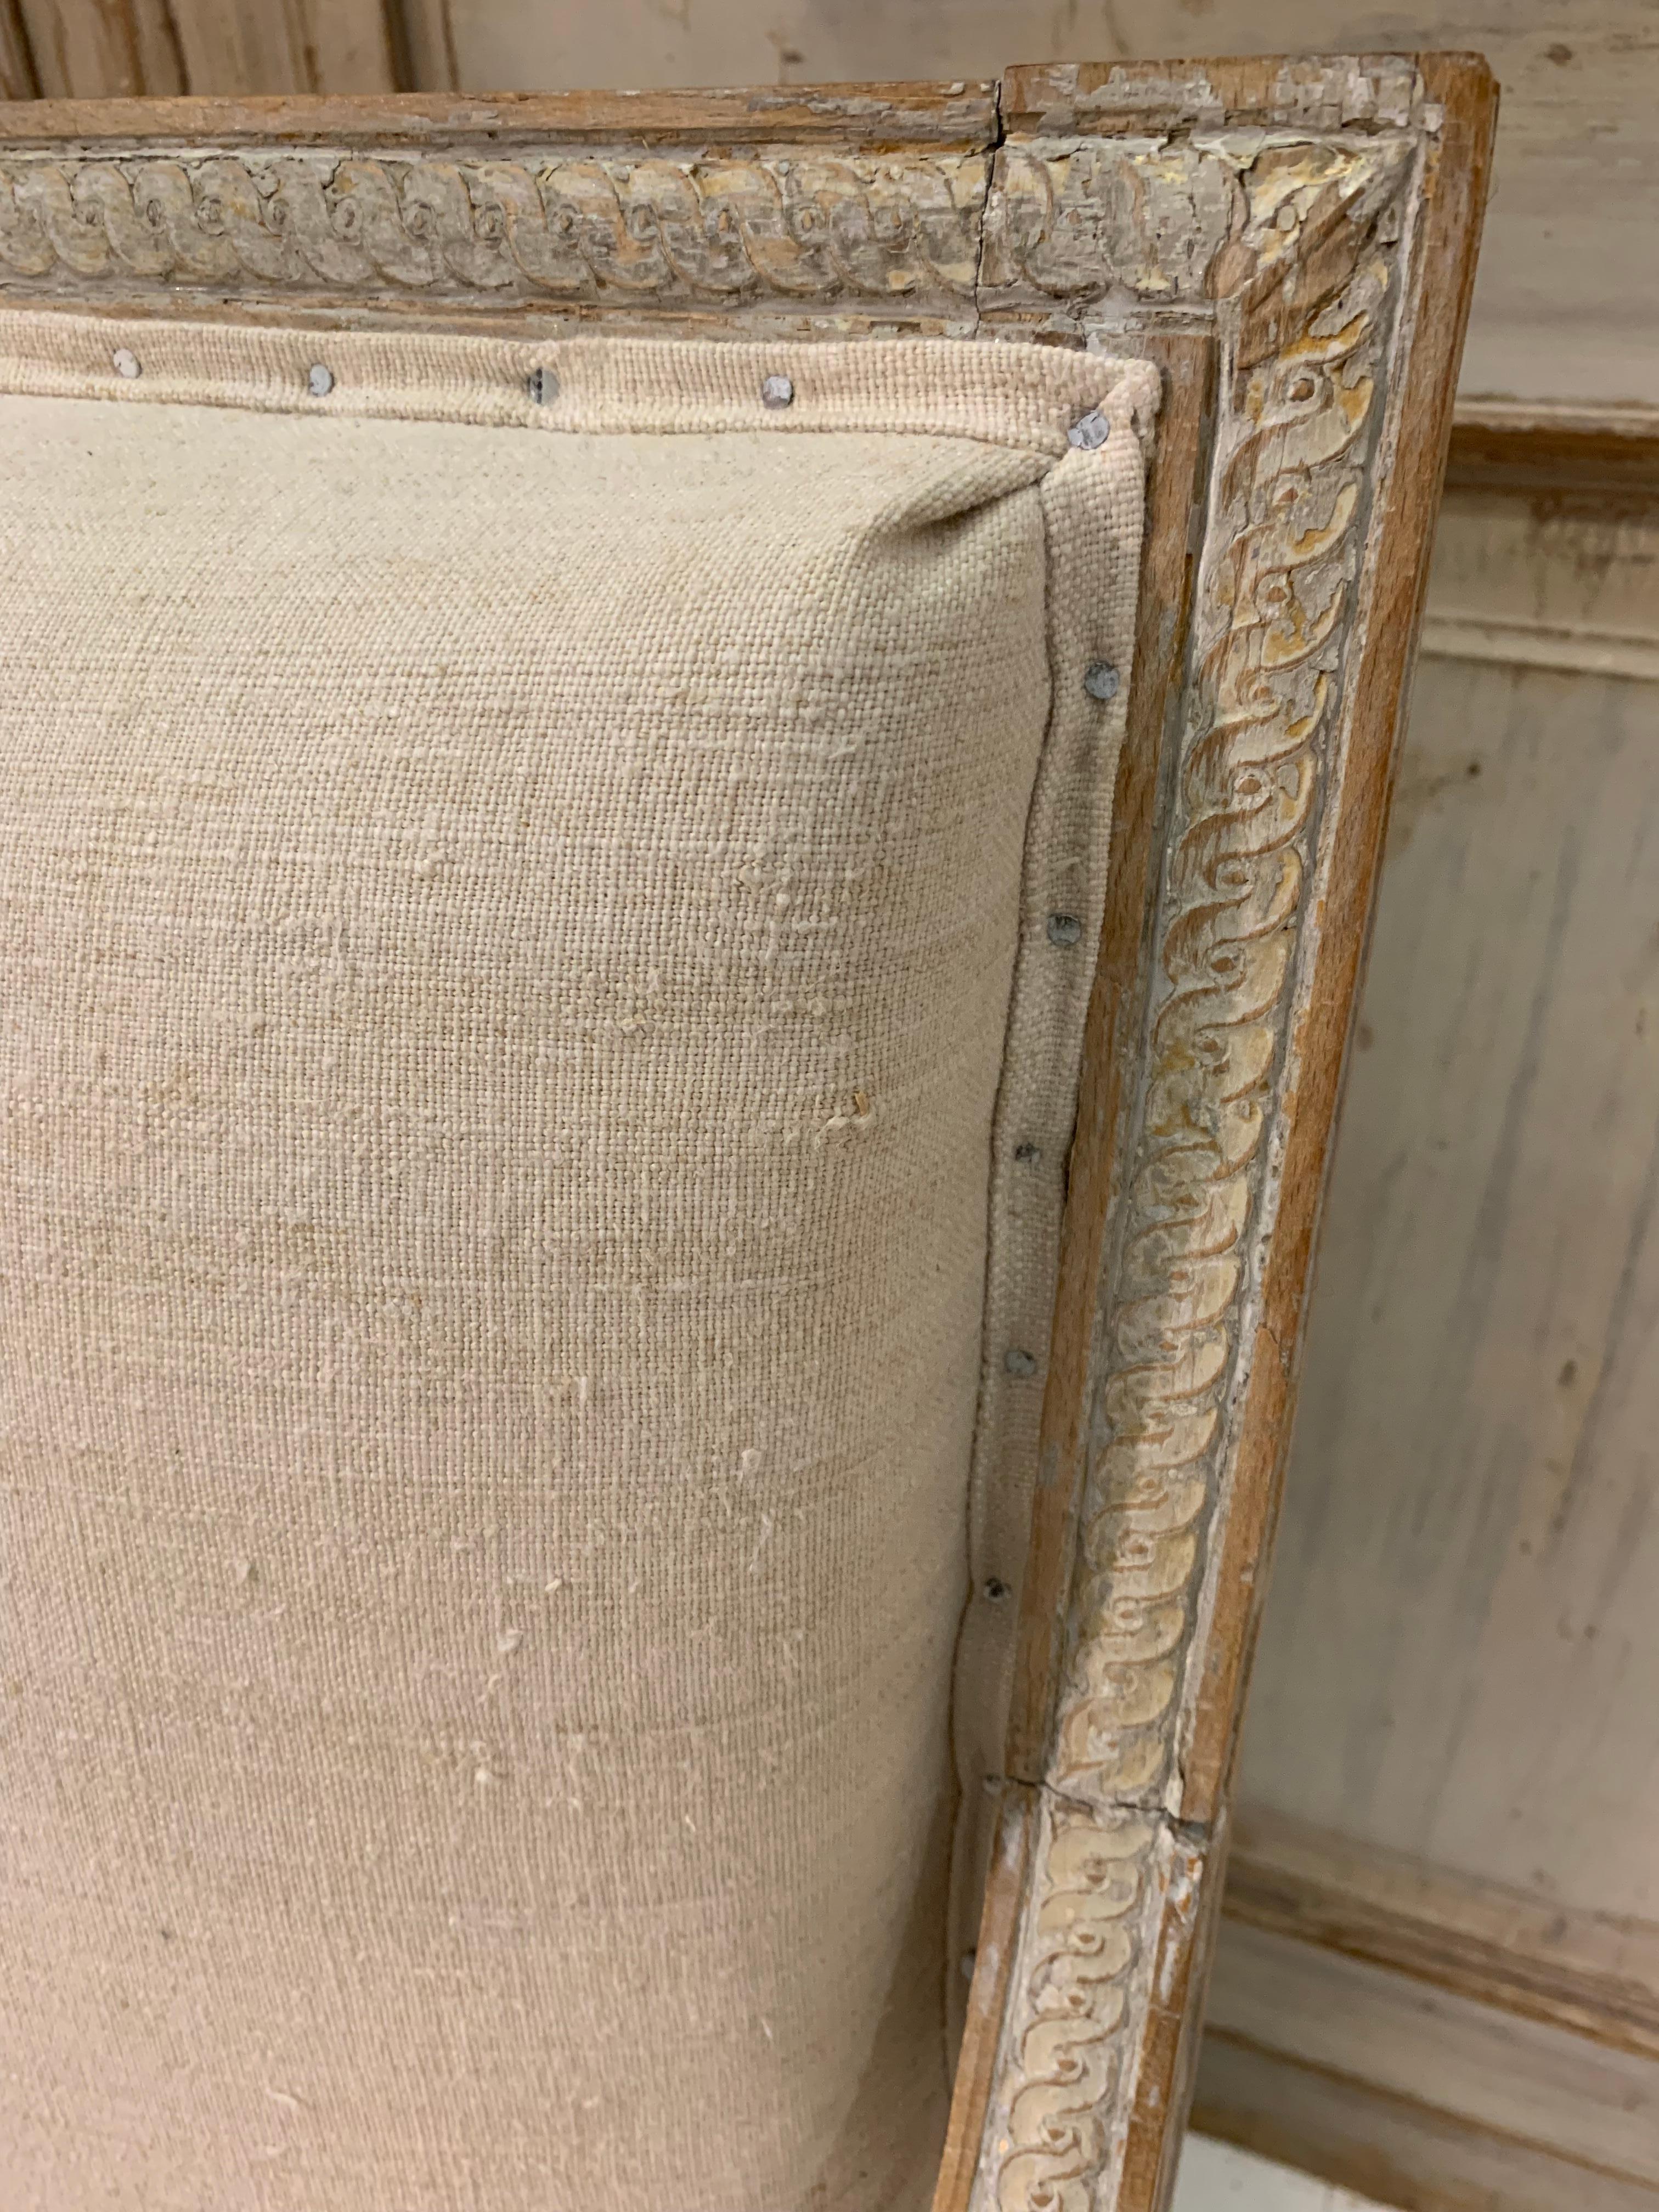 Late 18th Century 18th Century Swedish Gustavian Sofa Original Paint in Vintage French Linen For Sale